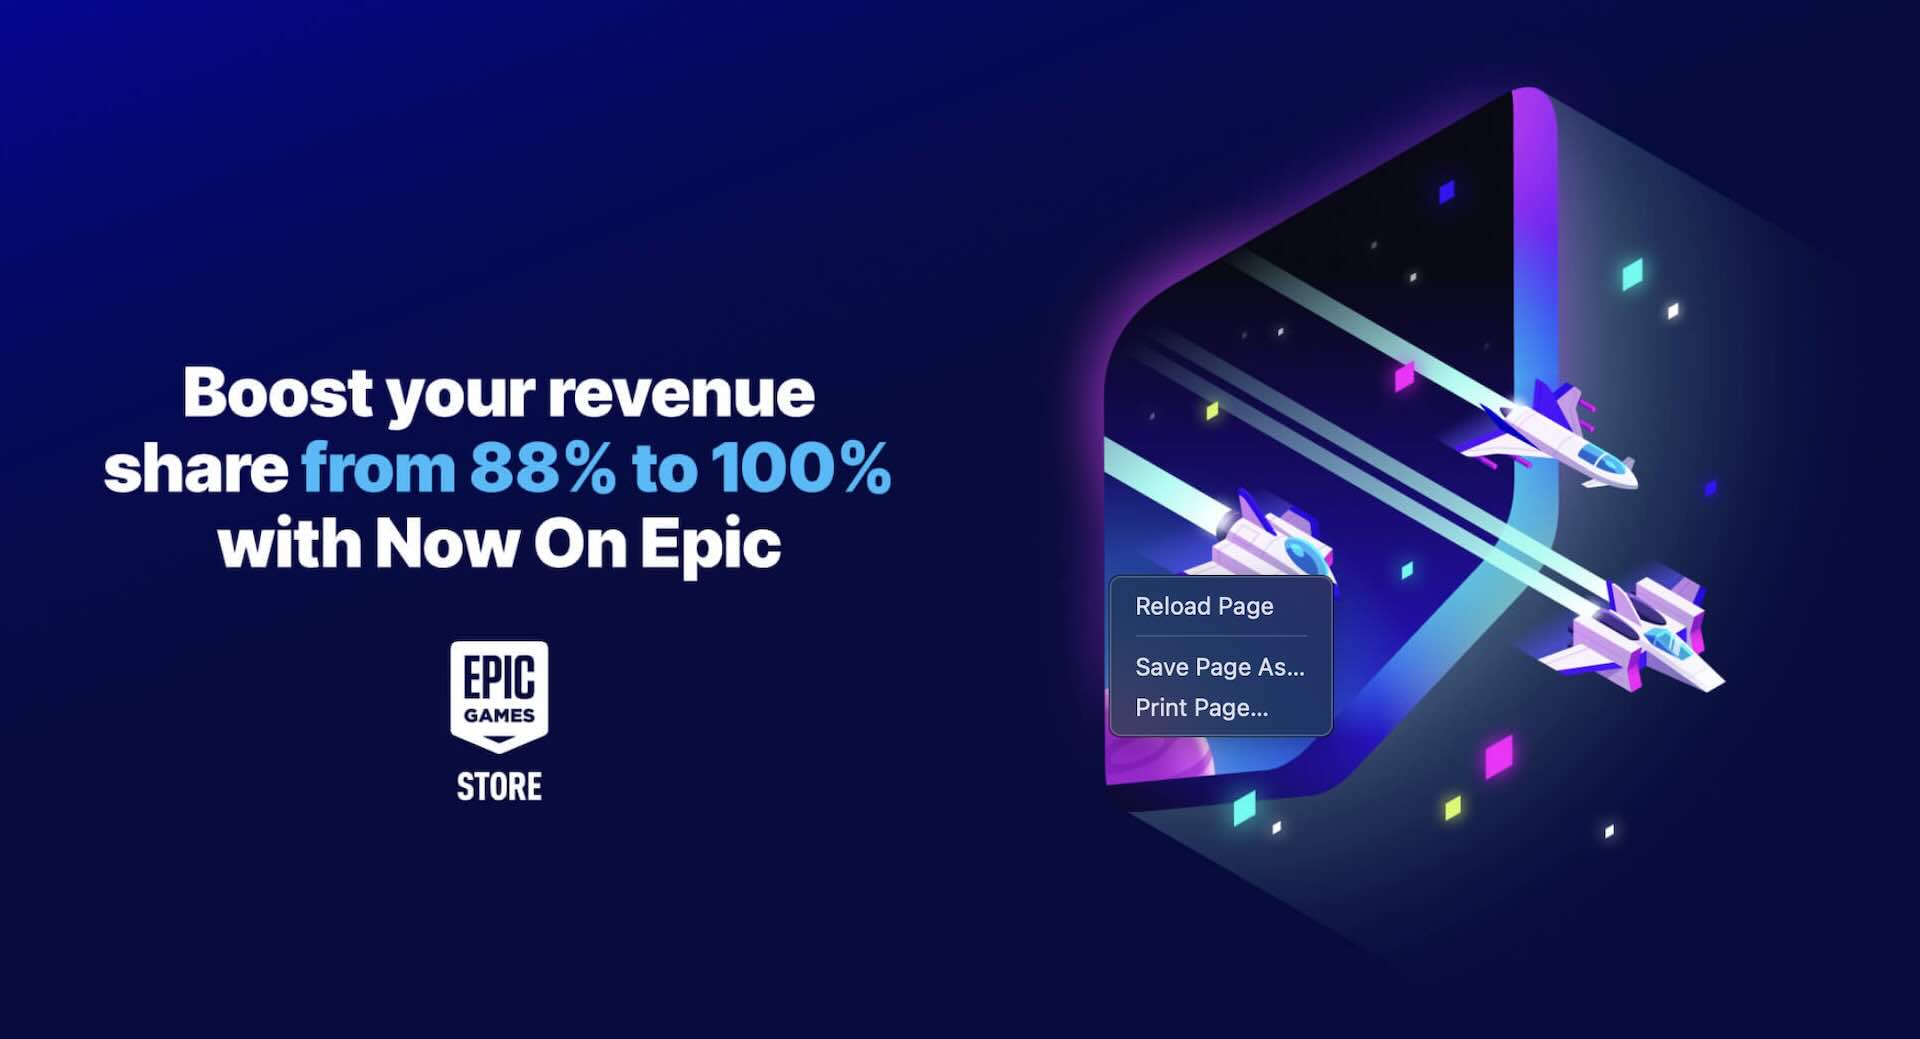 Epic Games - Now On Epic